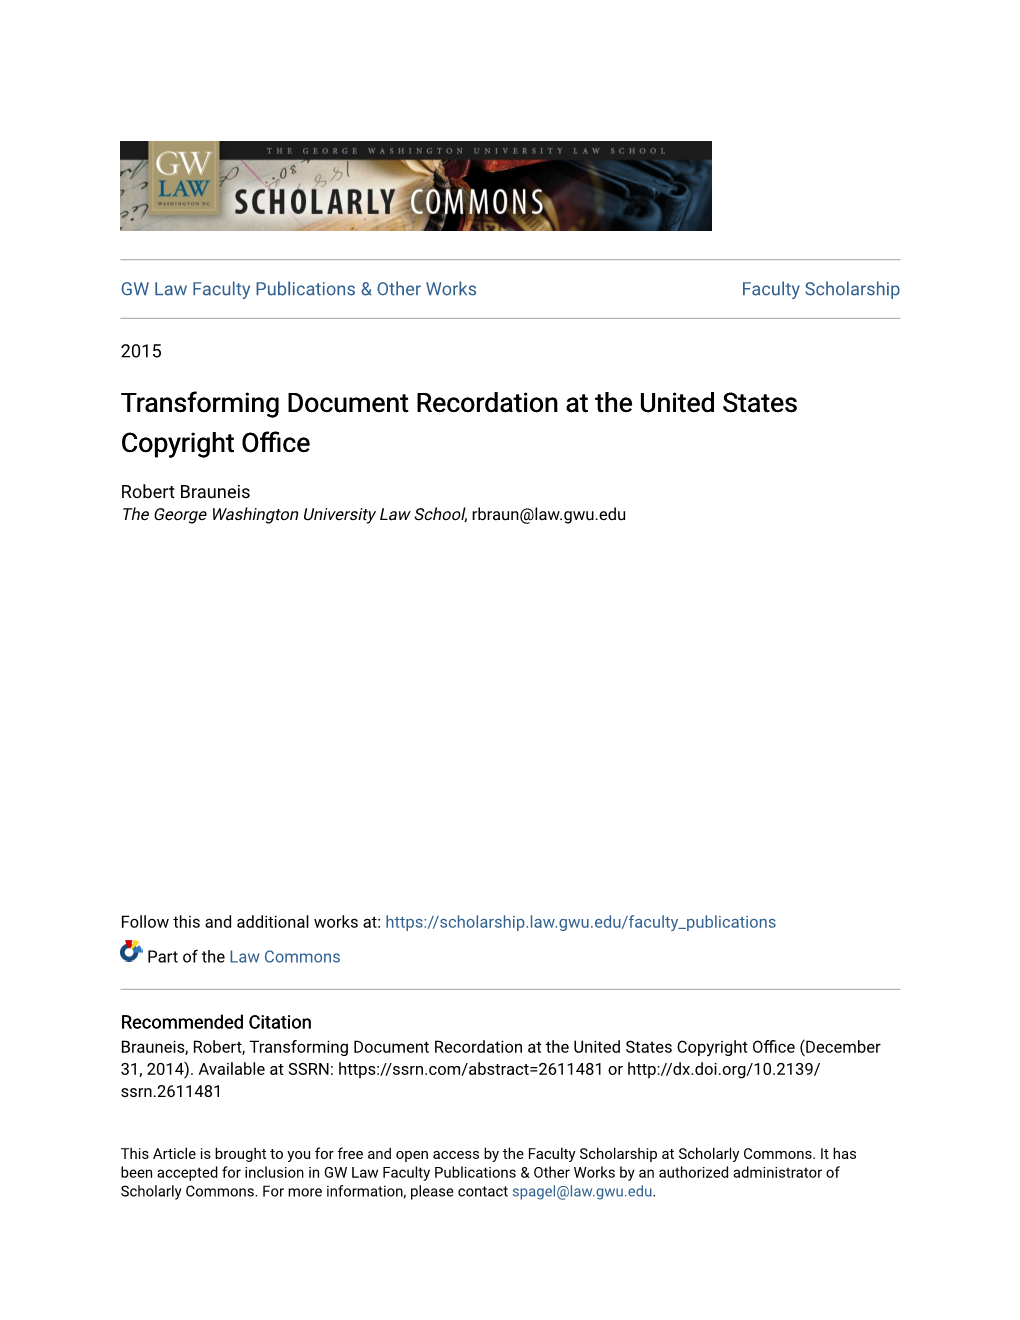 Transforming Document Recordation at the United States Copyright Office